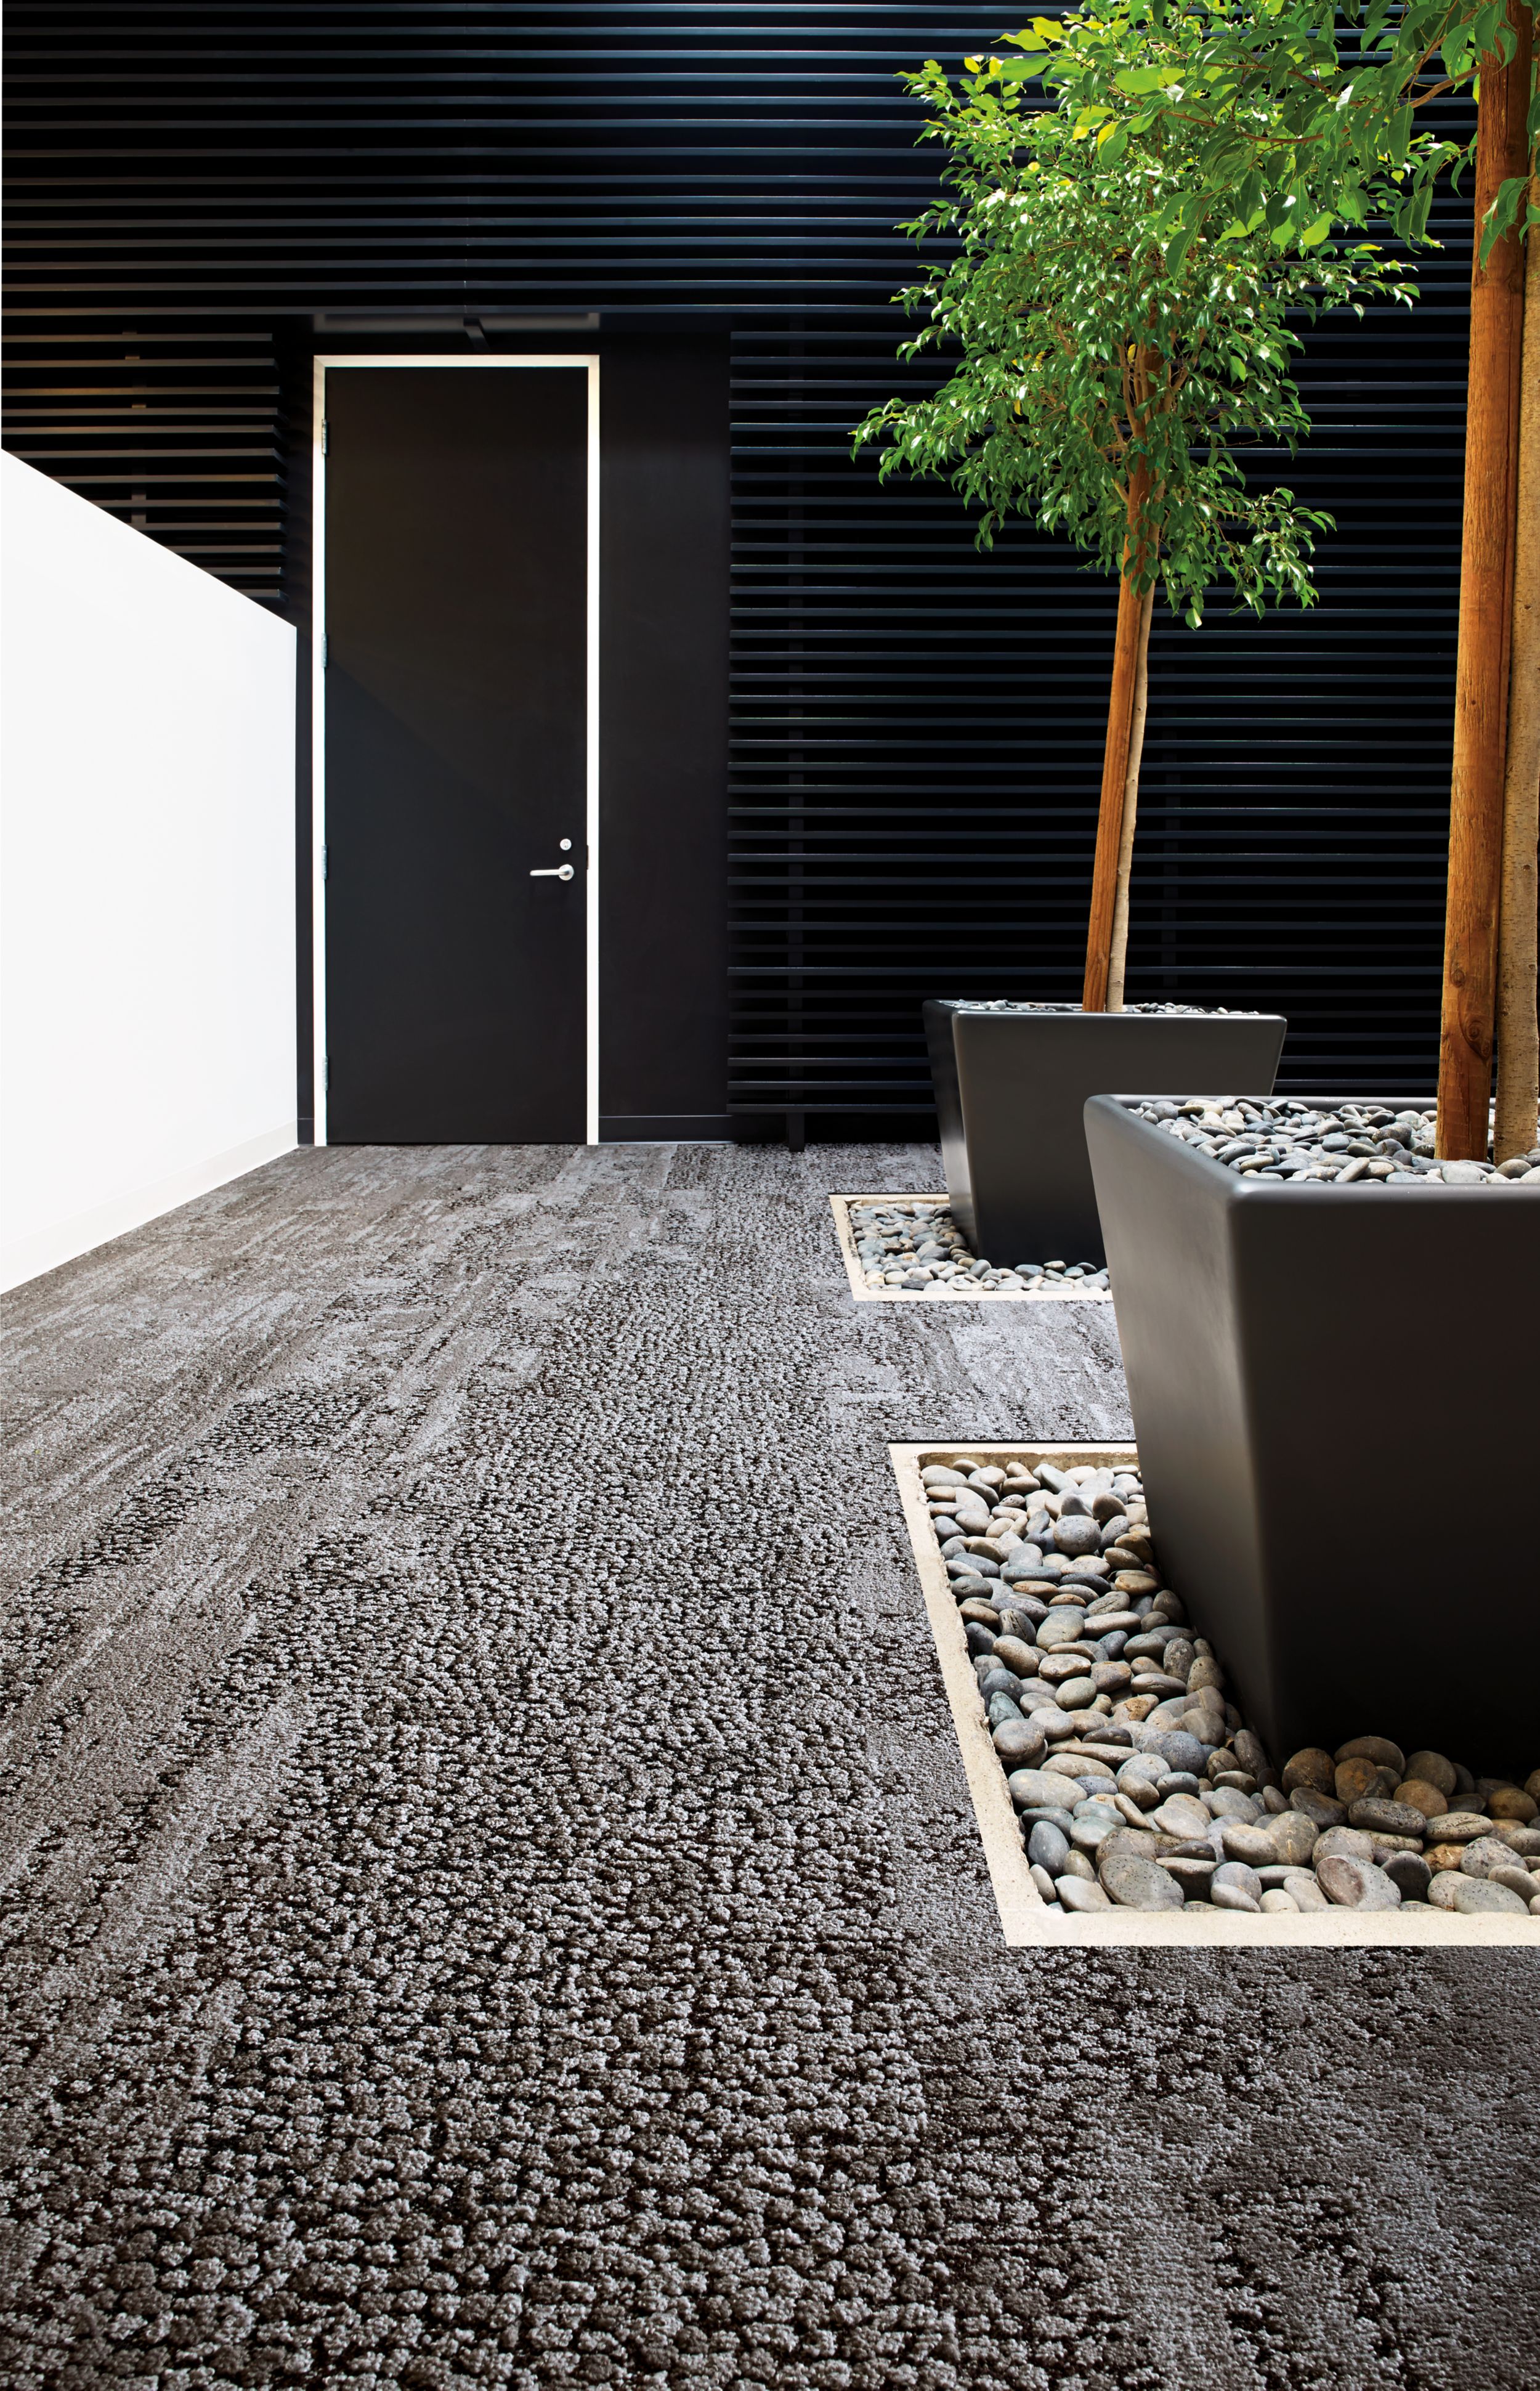 Interface HN810, HN820, HN840 and HN850 plank carpet tiles in white anc black room with potted trees and river rock número de imagen 4